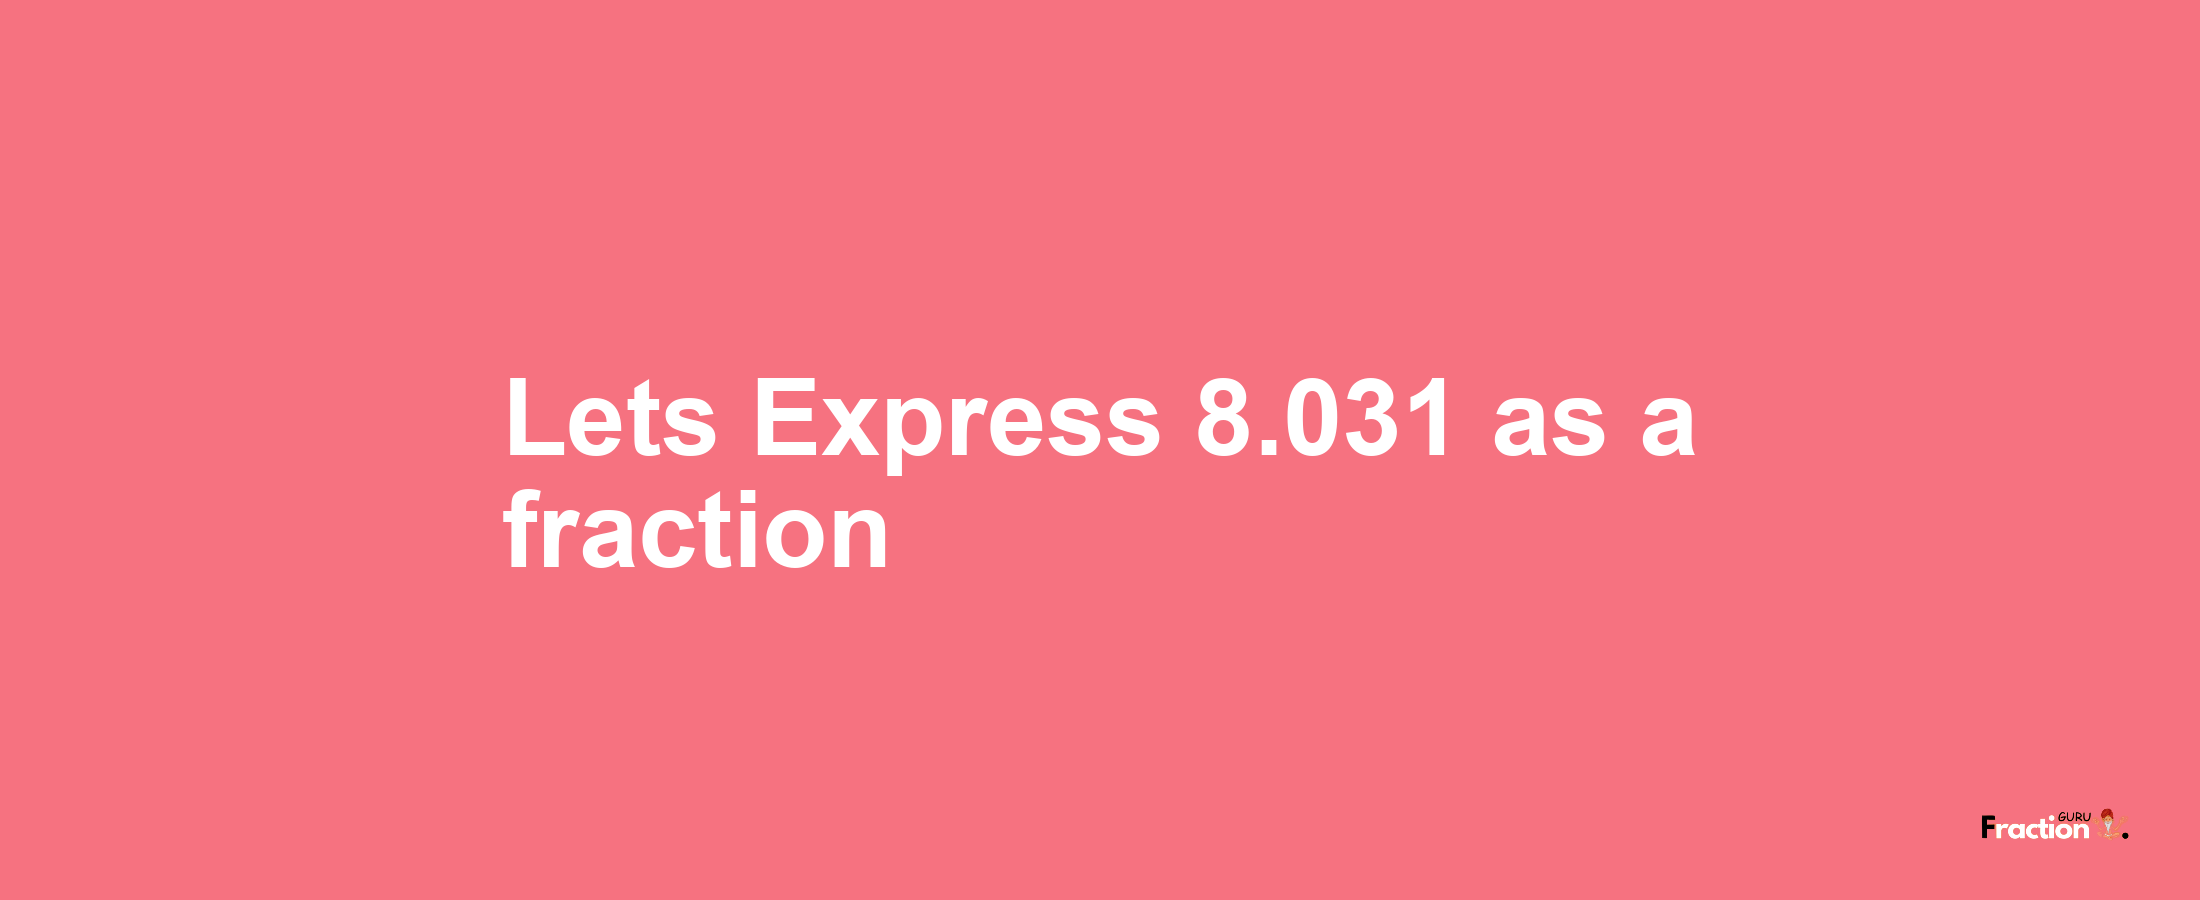 Lets Express 8.031 as afraction